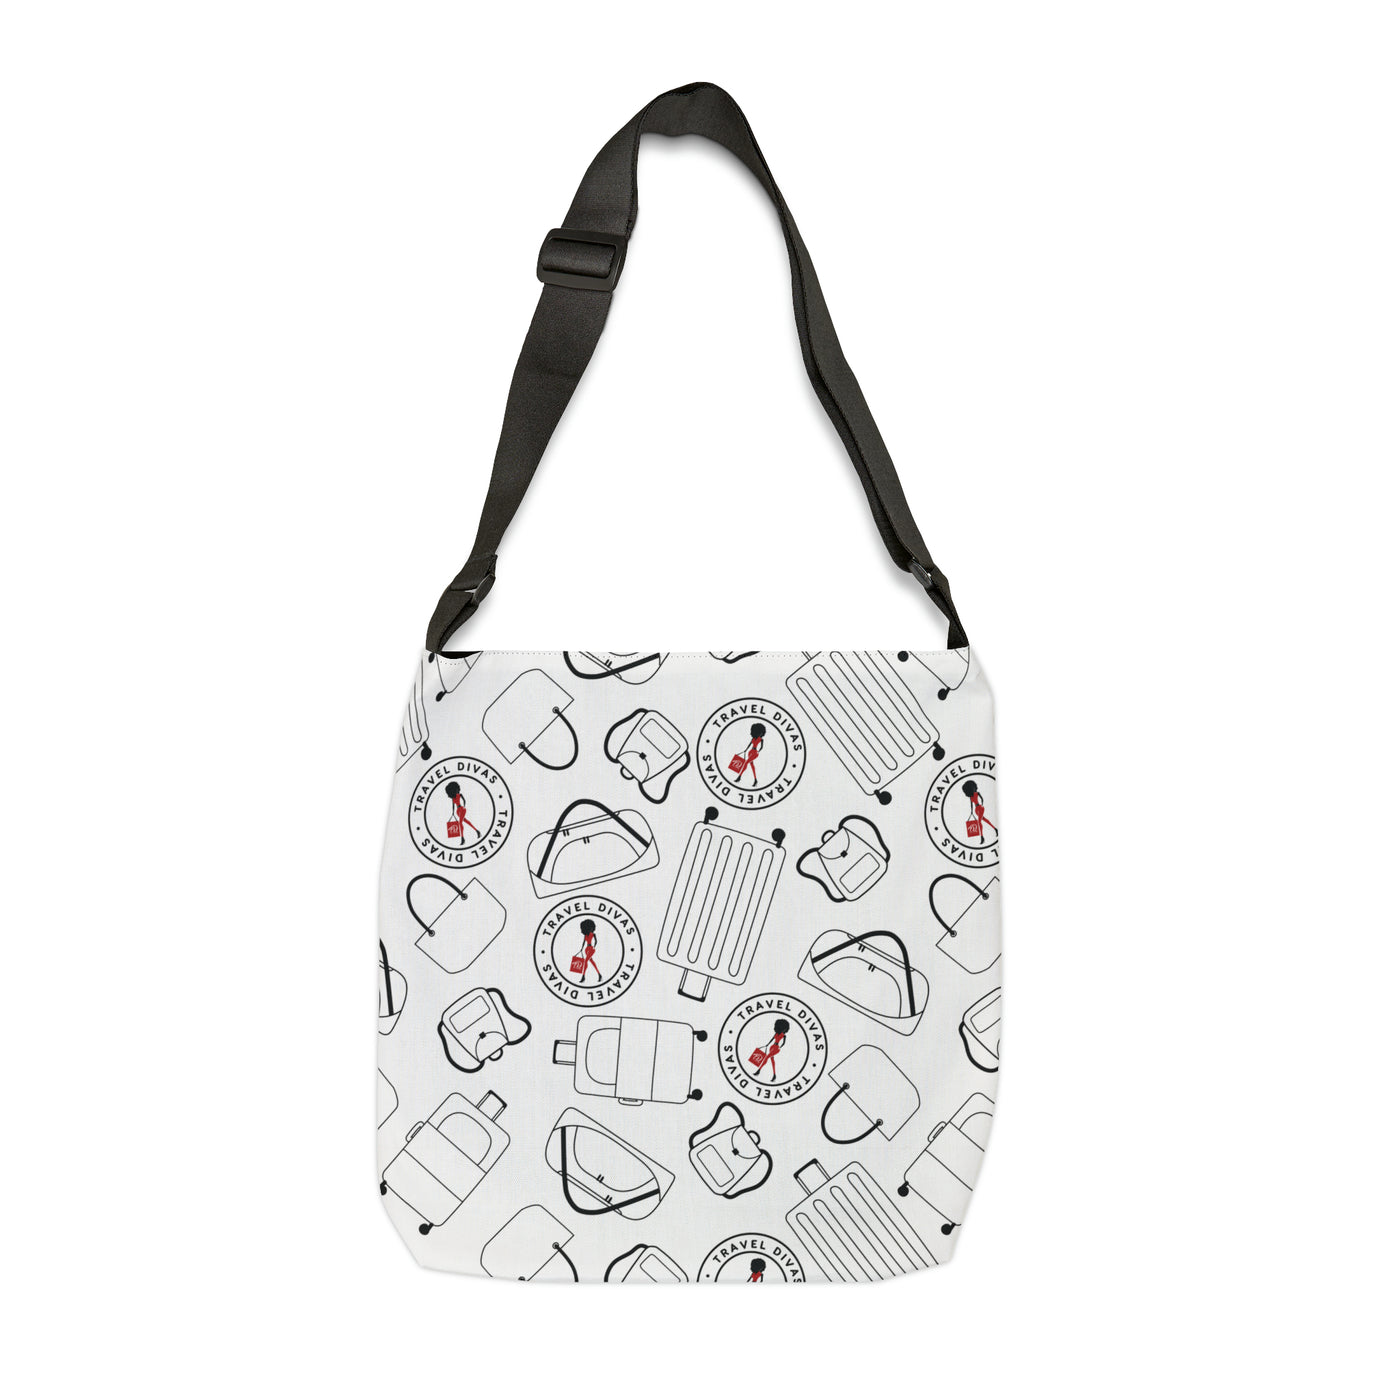 Bags Stay Ready Adjustable Large Crossbody/Tote Bag